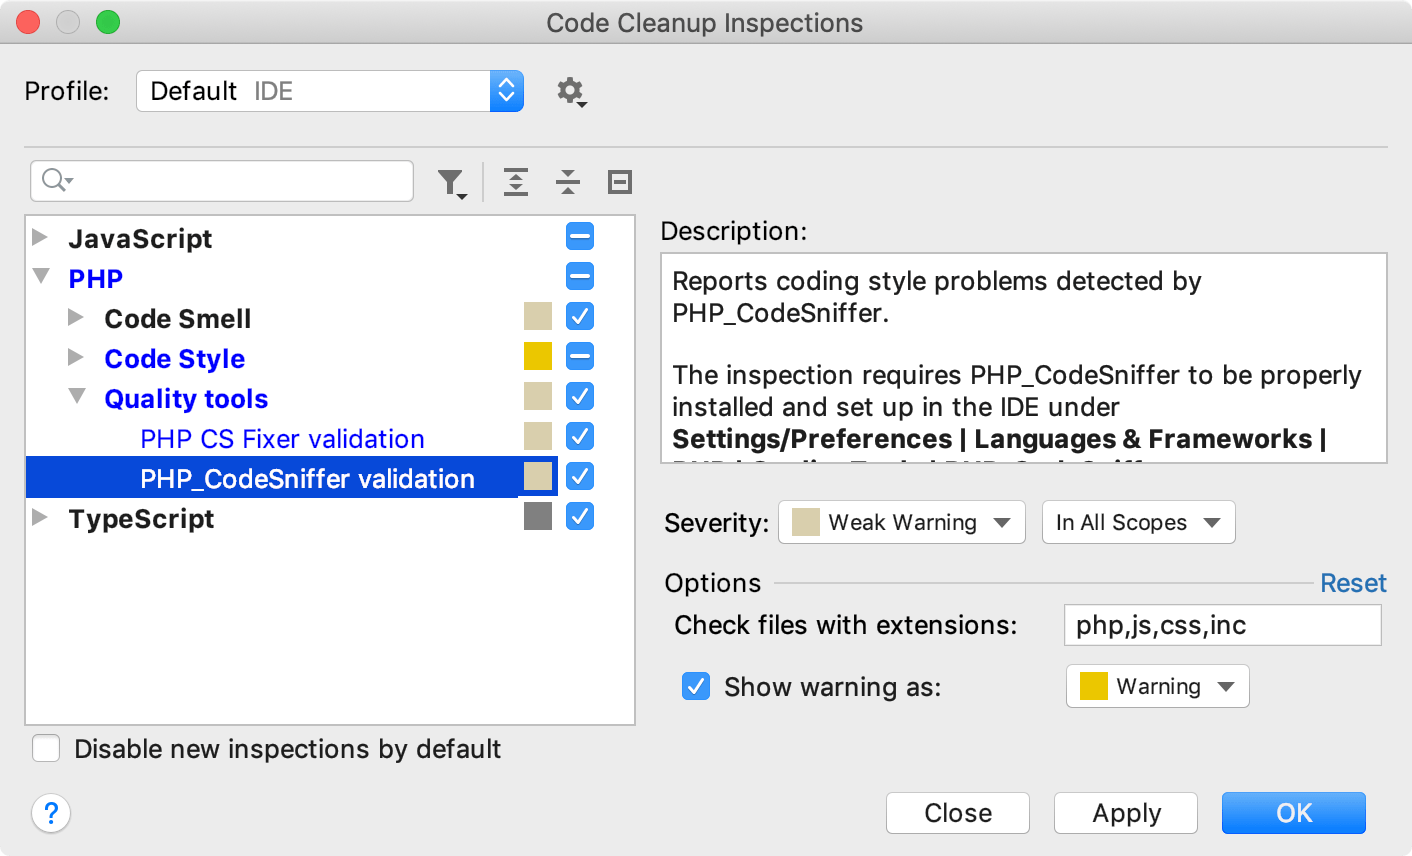 the Code Cleanup Inspections dialog